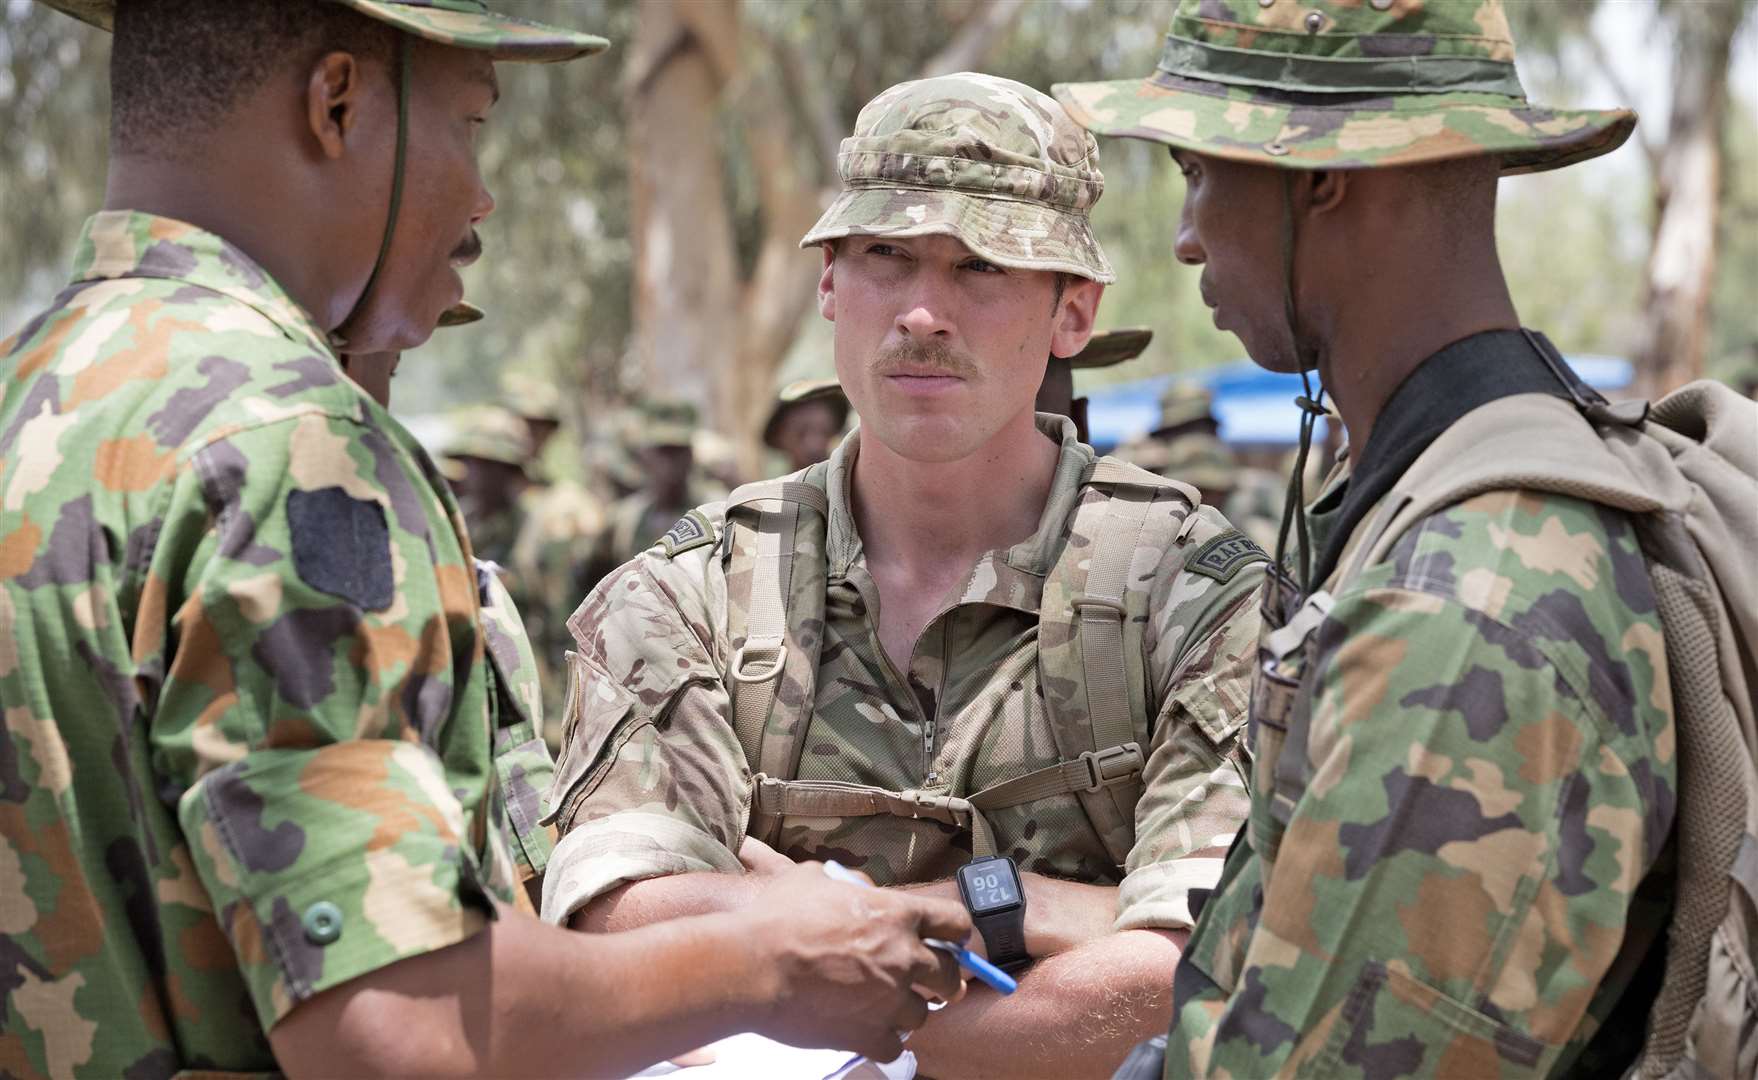 RAF Regiment personnel in Nigeria with their Nigerian Air Force Regiment counterparts.